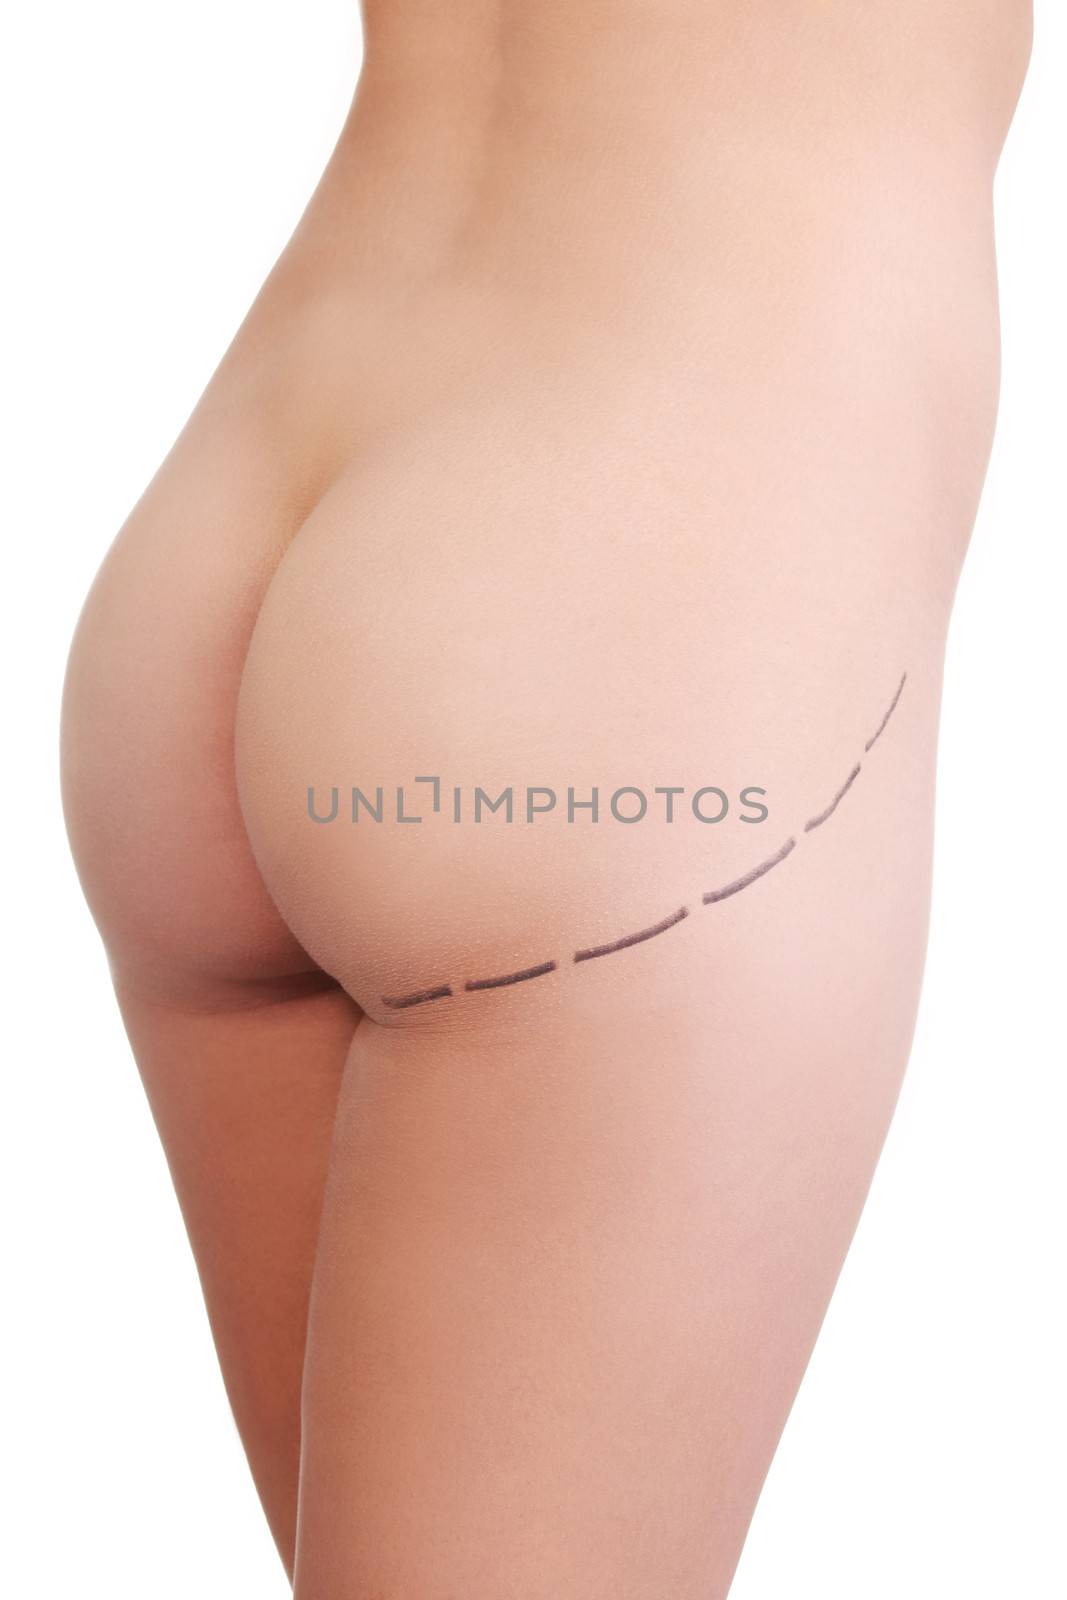 Woman's buttock prepared to plastic surgery by BDS